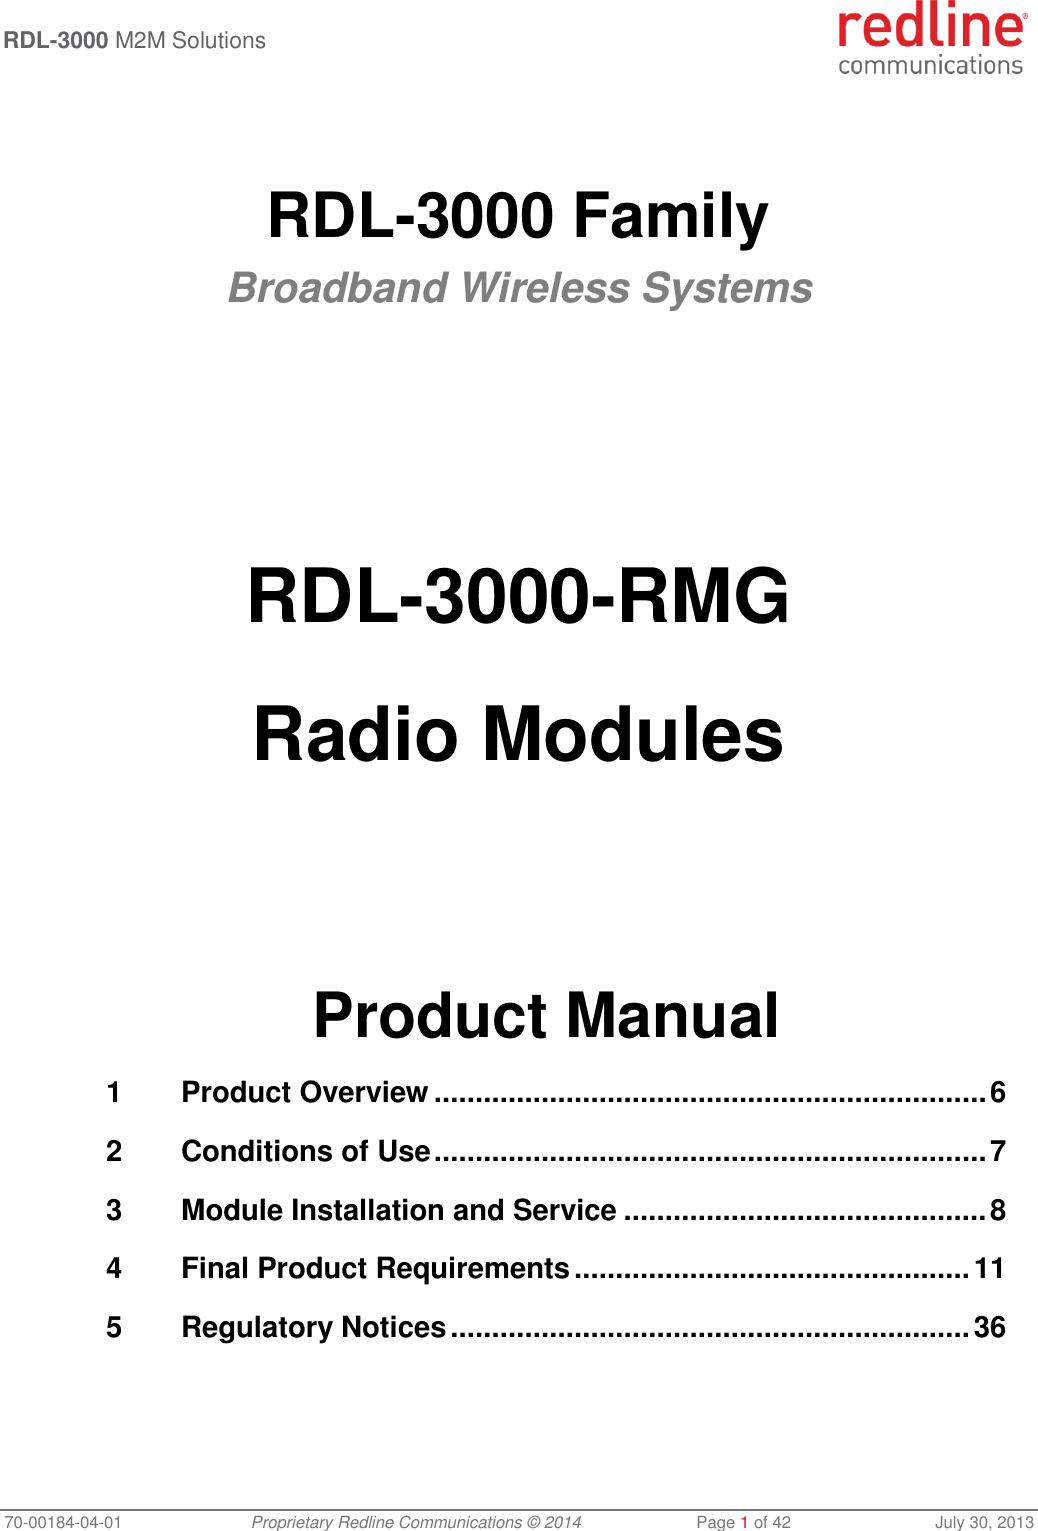  RDL-3000 M2M Solutions   70-00184-04-01 Proprietary Redline Communications © 2014  Page 1 of 42  July 30, 2013   RDL-3000 Family Broadband Wireless Systems        RDL-3000-RMG  Radio Modules       Product Manual 1 Product Overview ................................................................... 6 2 Conditions of Use ................................................................... 7 3 Module Installation and Service ............................................ 8 4 Final Product Requirements ................................................ 11 5 Regulatory Notices ............................................................... 36 